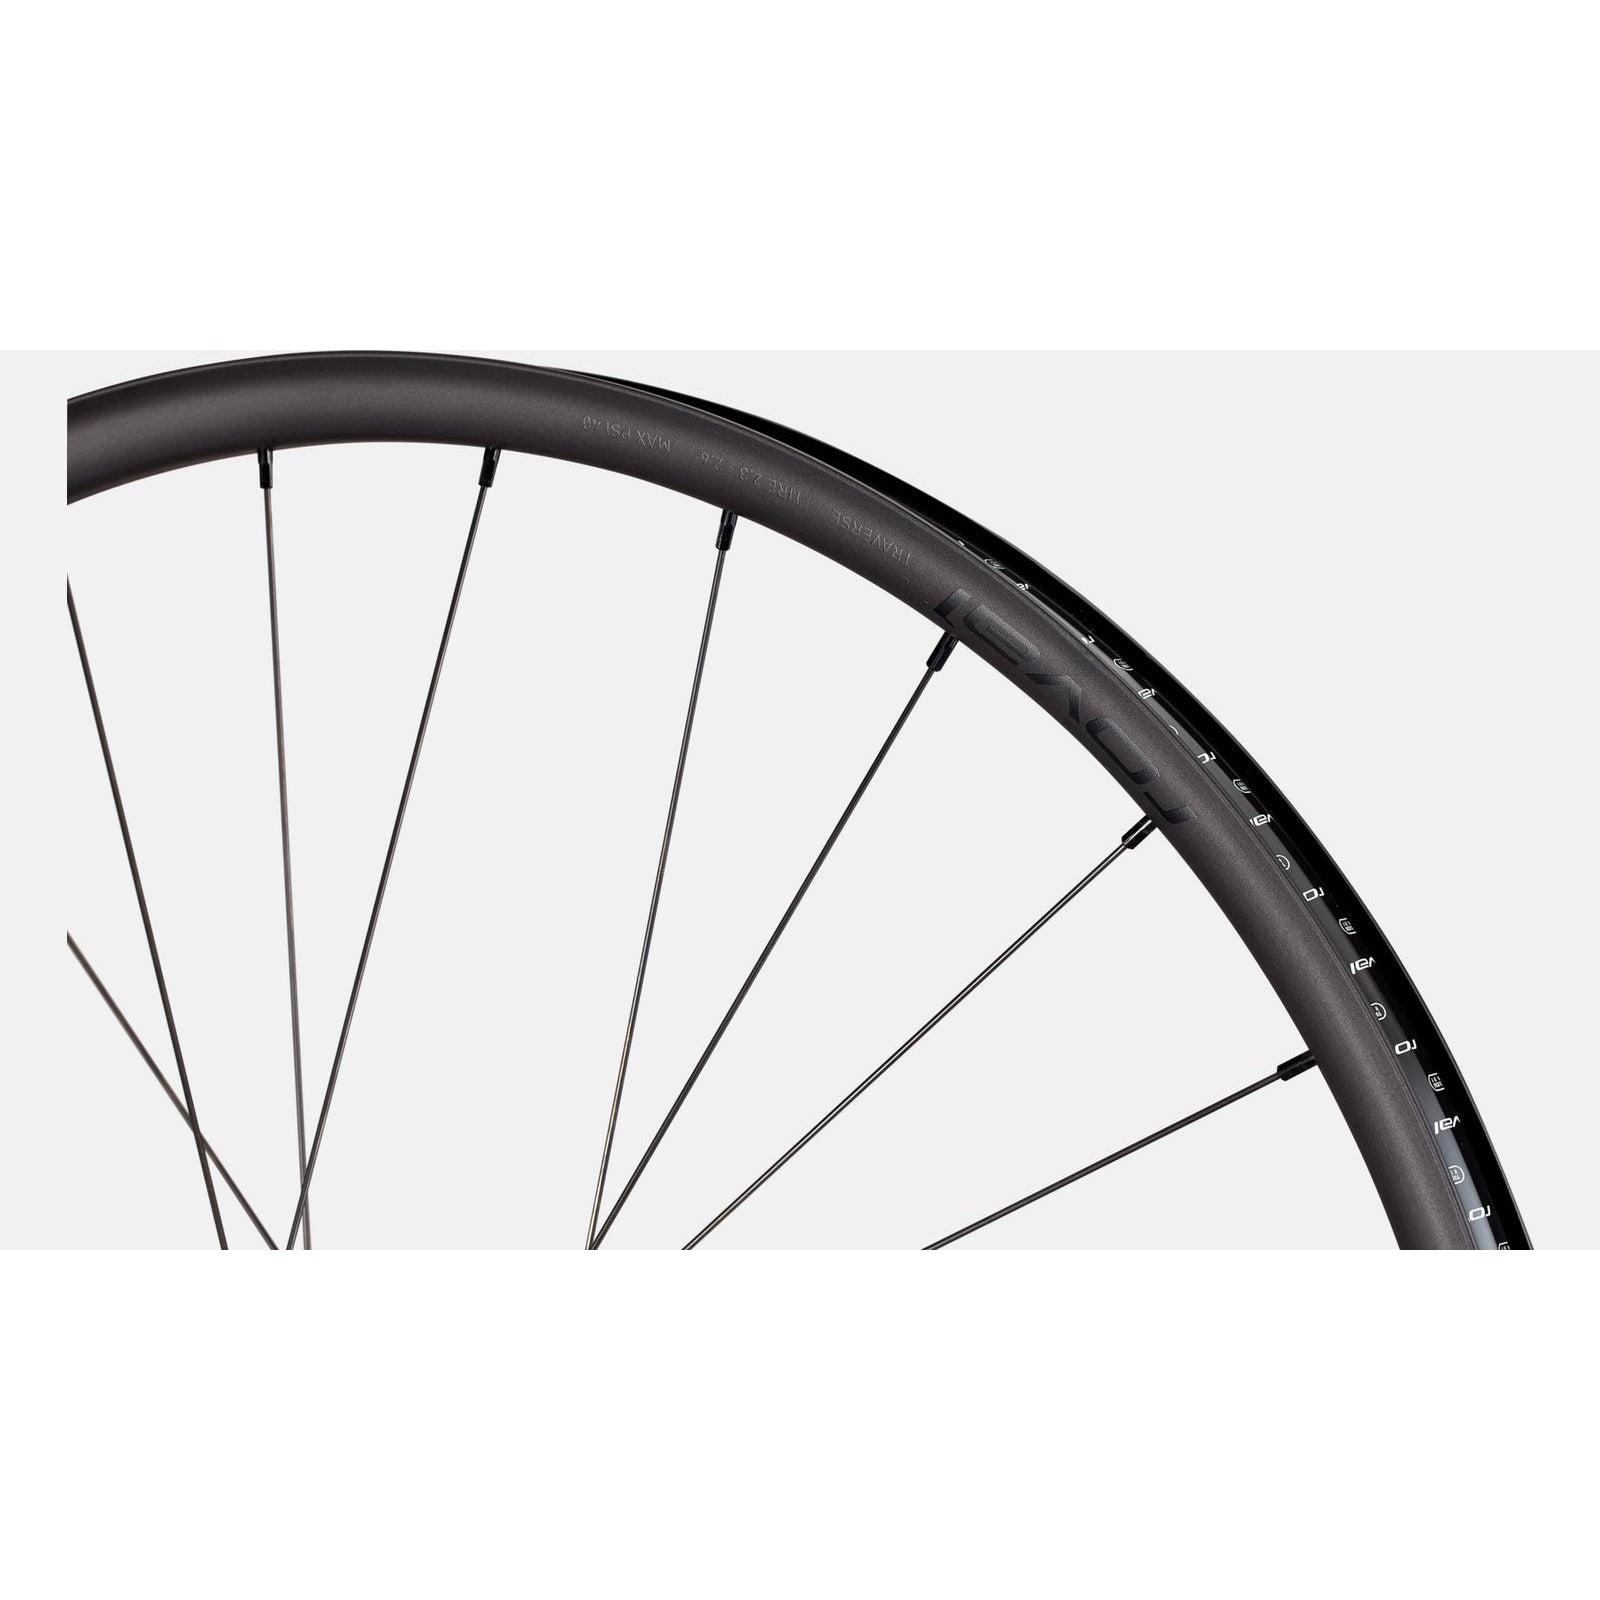 Specialized Roval Traverse Alloy 350 6B - Bicycle Rims - Bicycle Warehouse